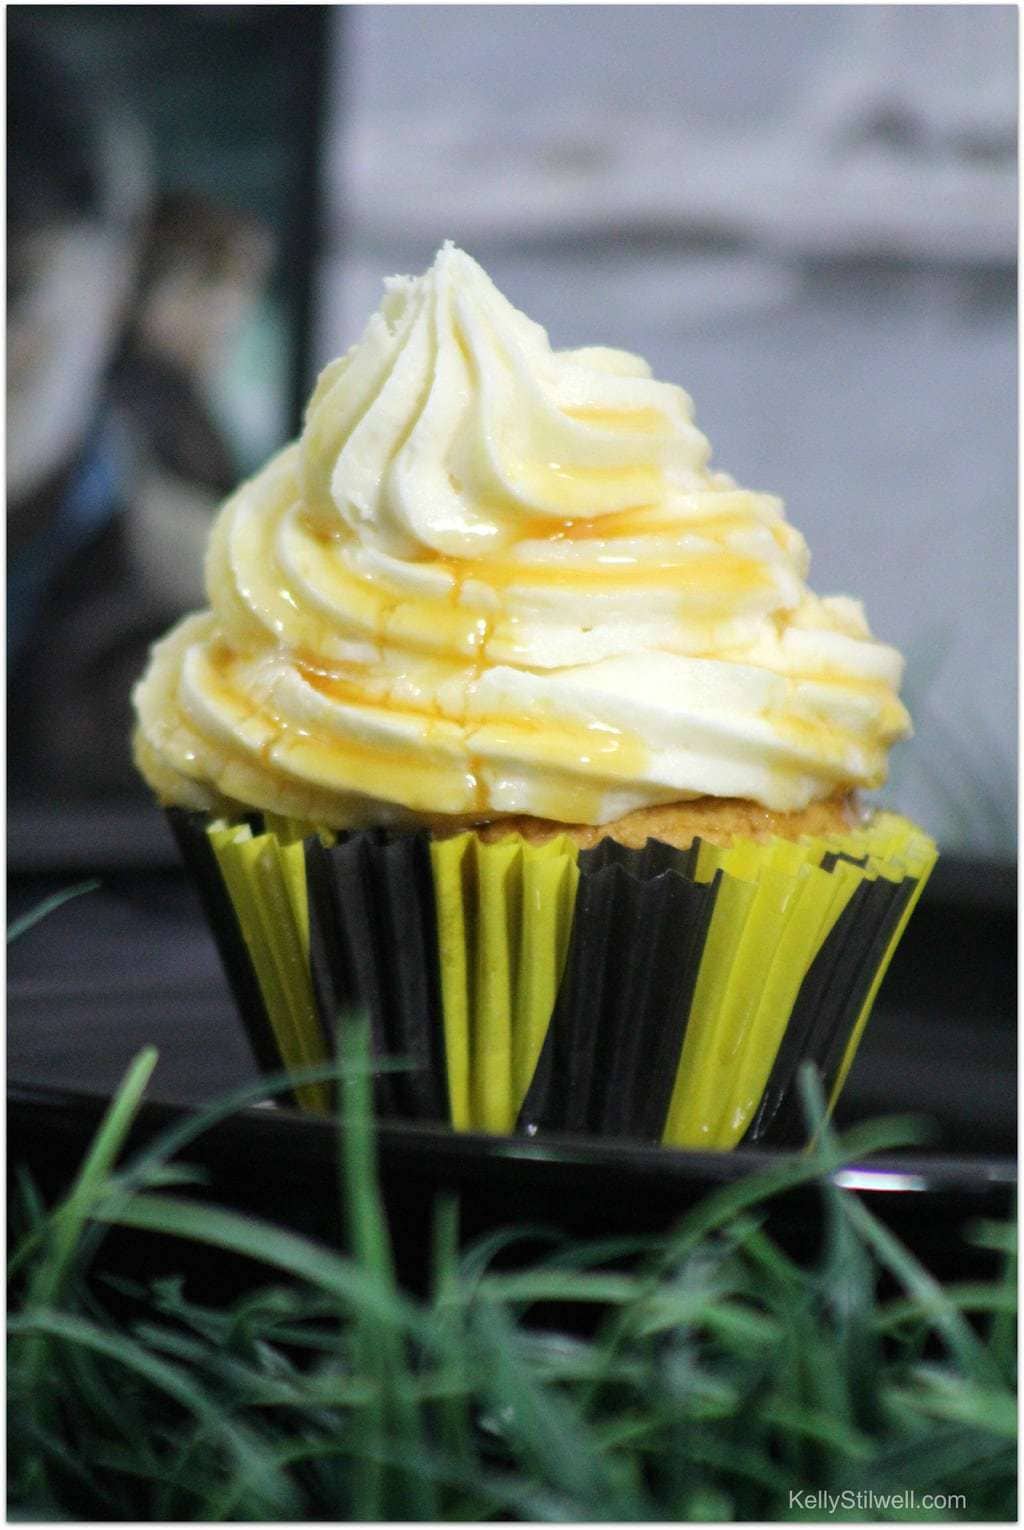 In the Wizarding World of Harry Potter, they serve up a delicious drink called Butterbeer. If you've tasted it, you know how wonderful that flavor will be in a Harry Potter Butterbeer cupcake!